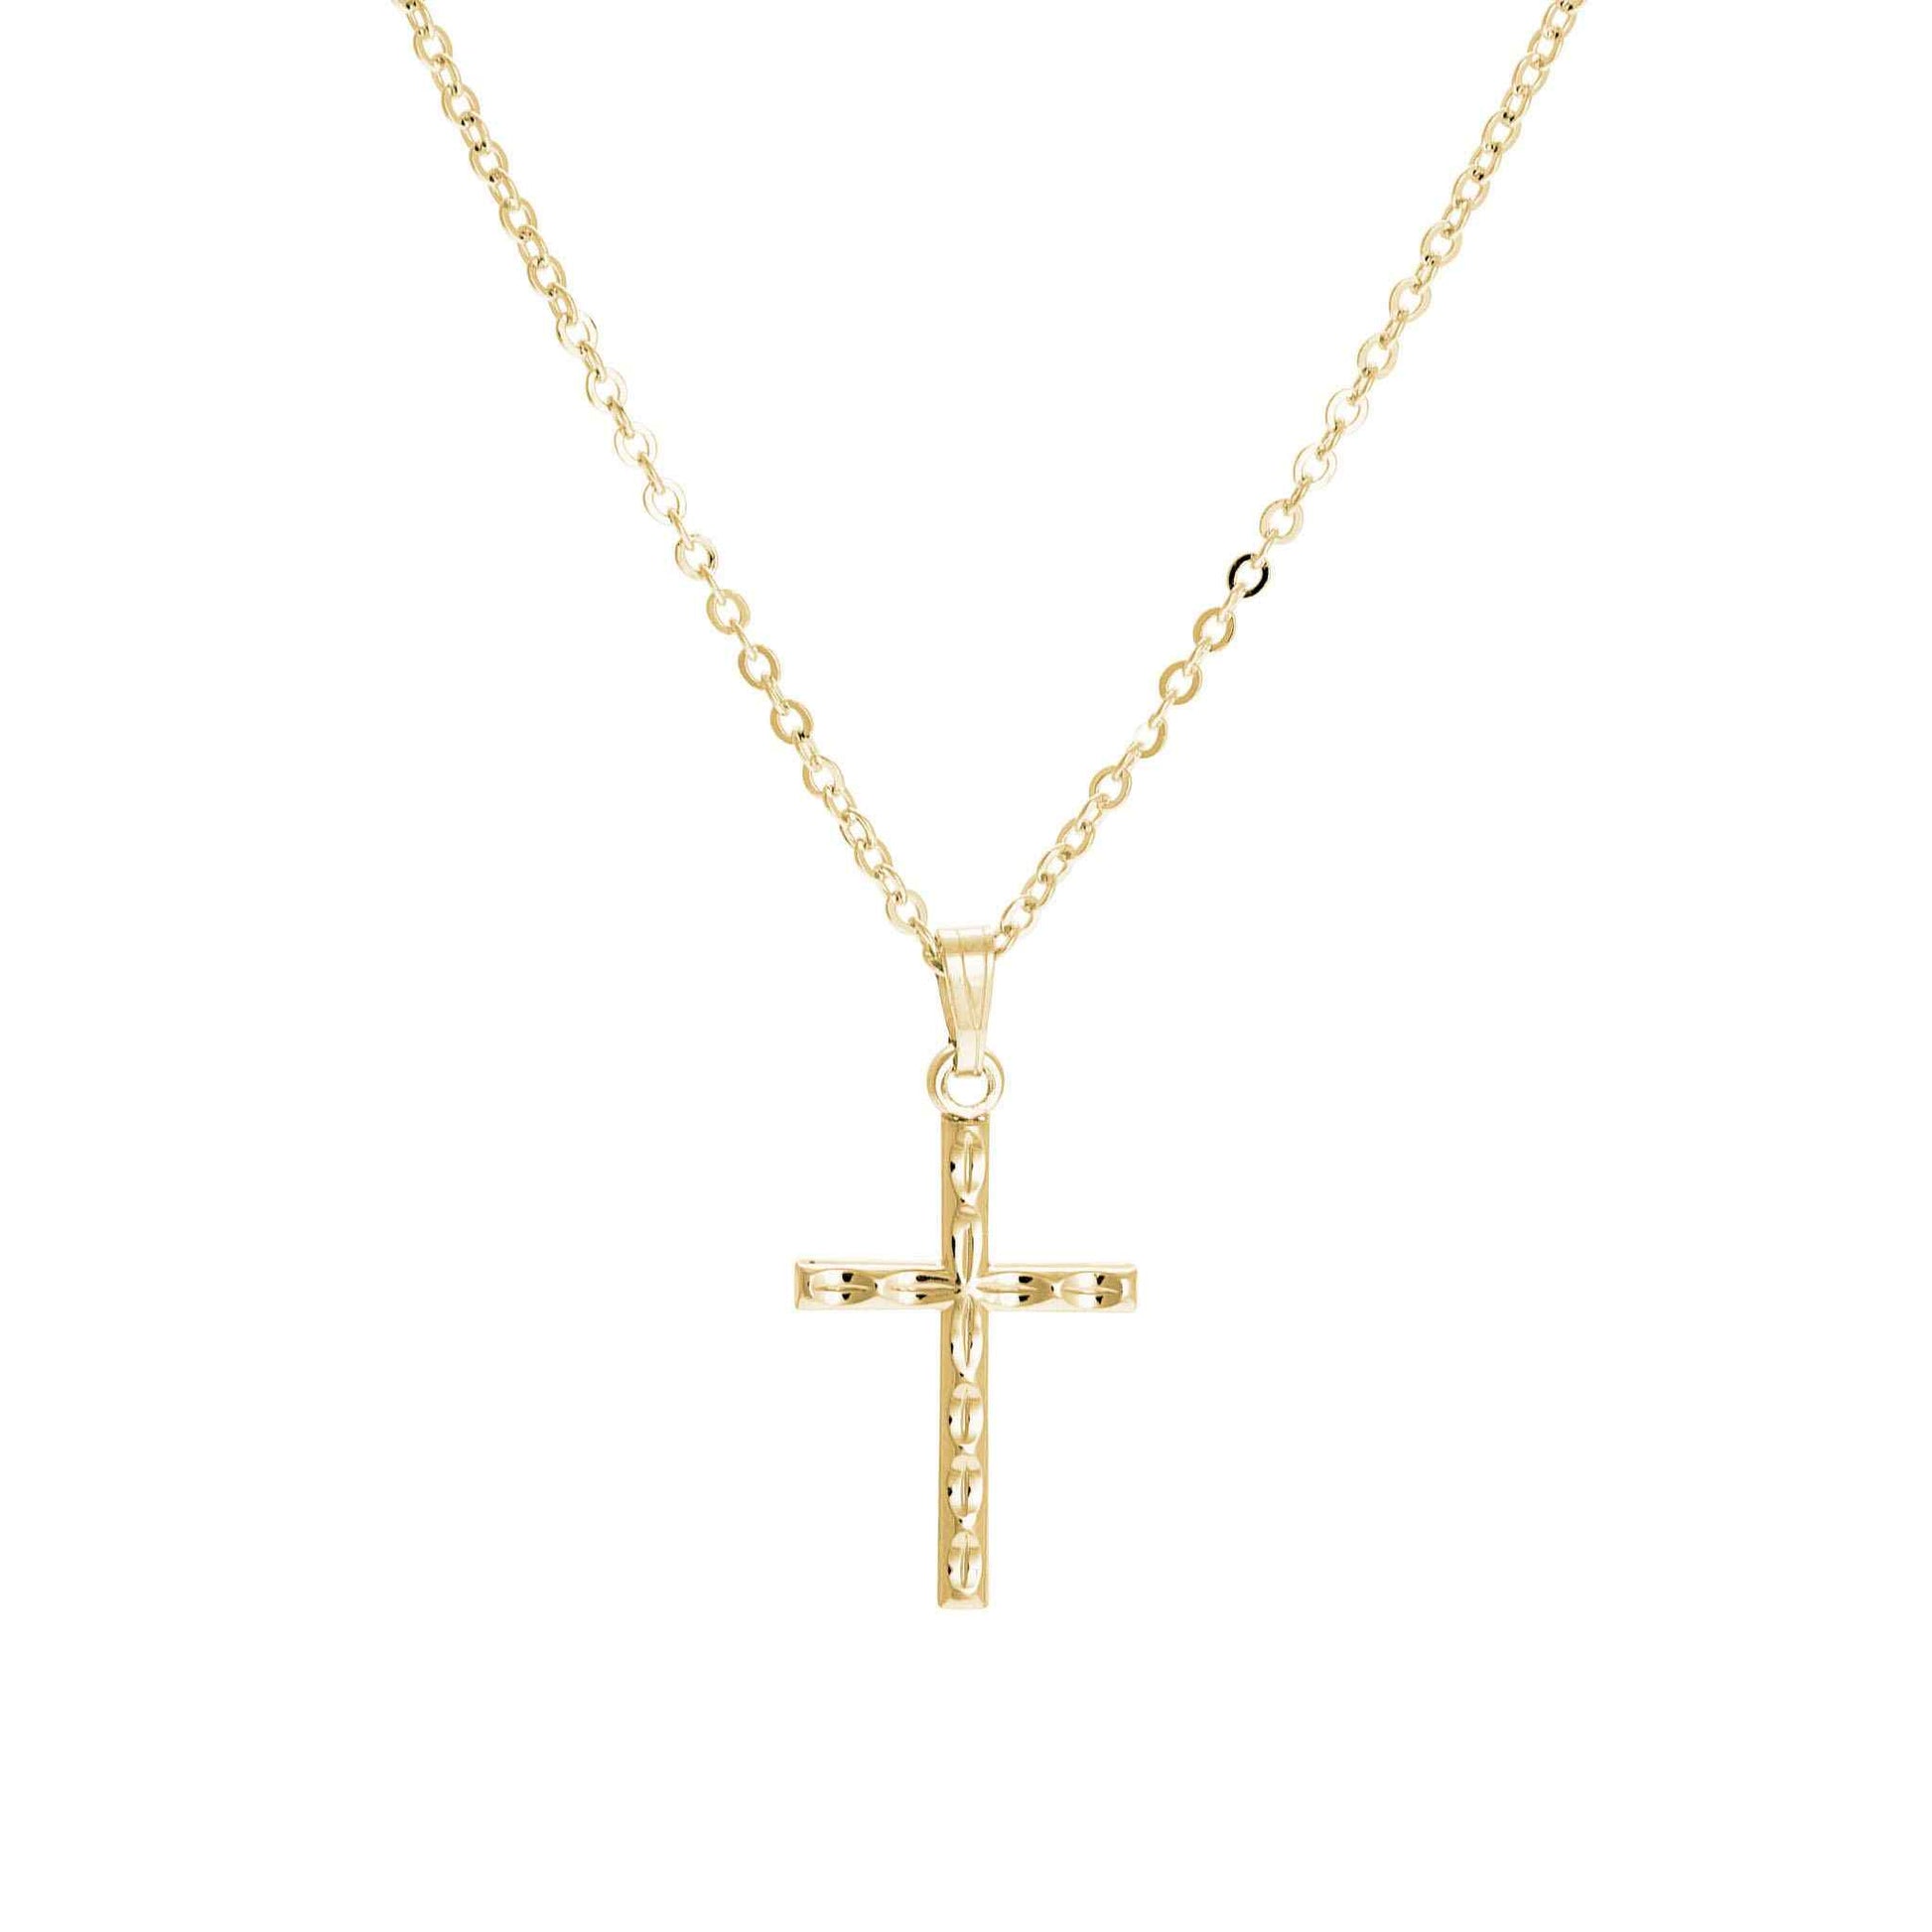 A scalloped medium cross displayed on a neutral white background.